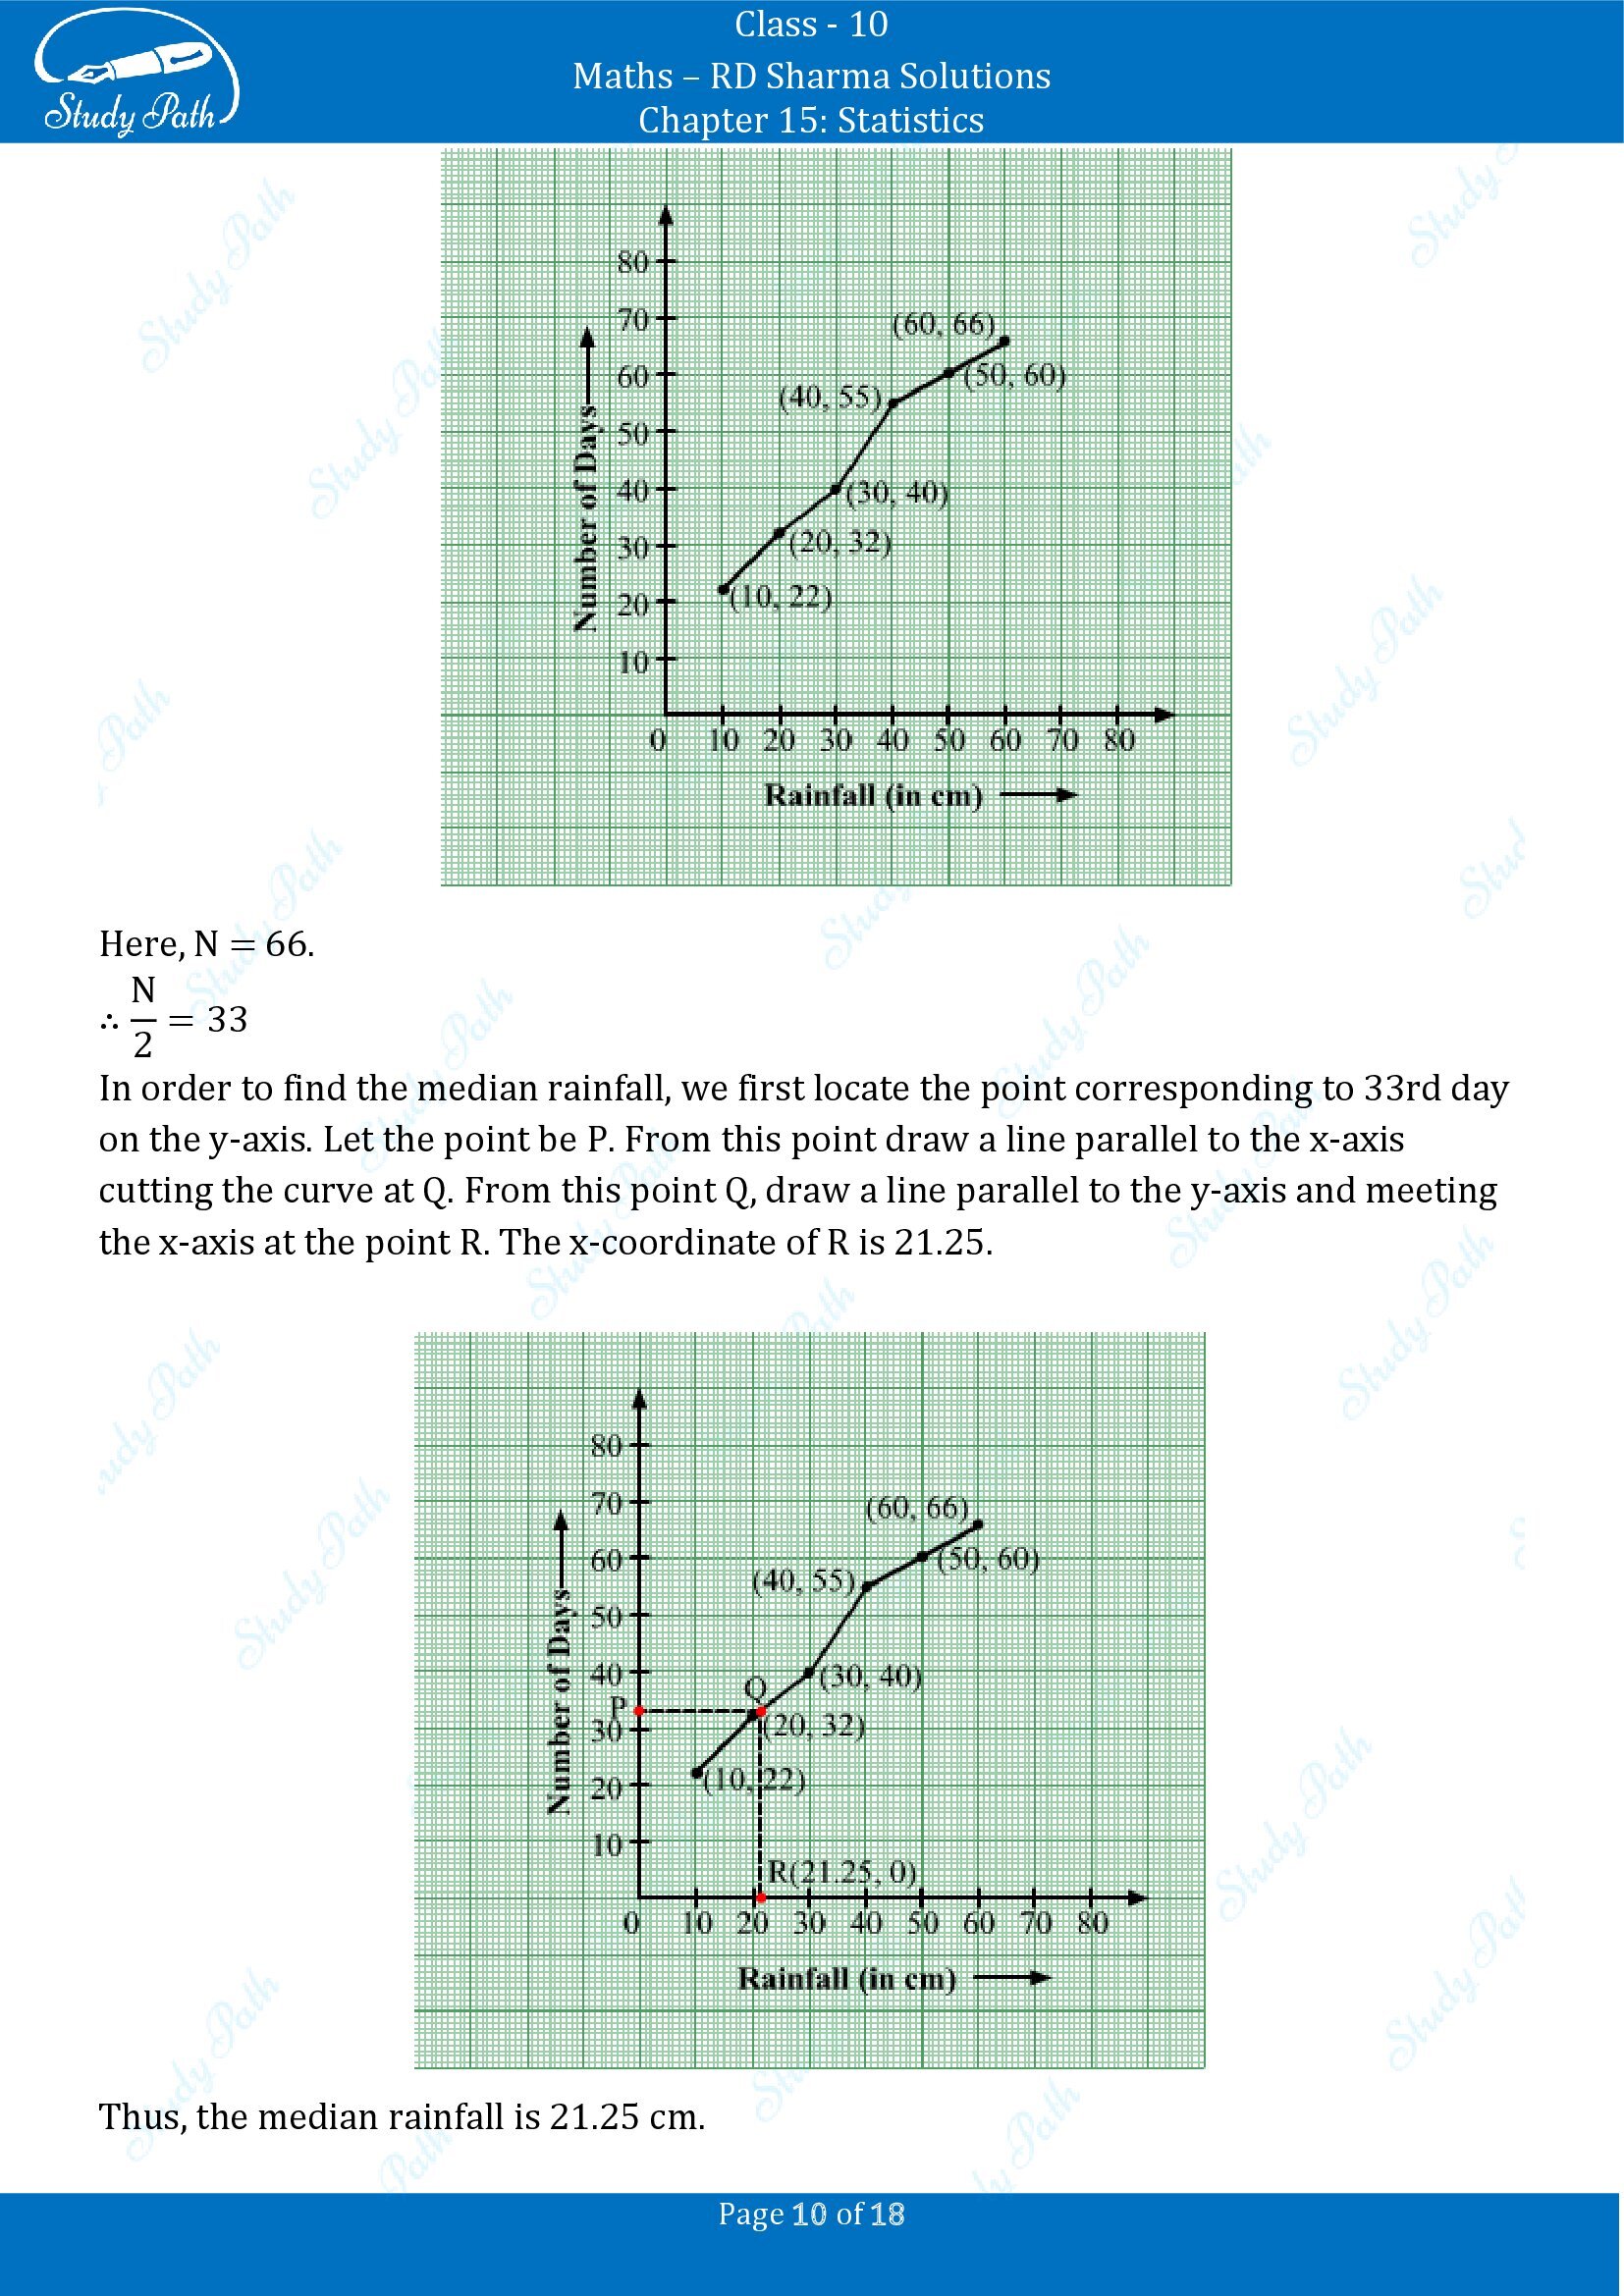 RD Sharma Solutions Class 10 Chapter 15 Statistics Exercise 15.6 00010